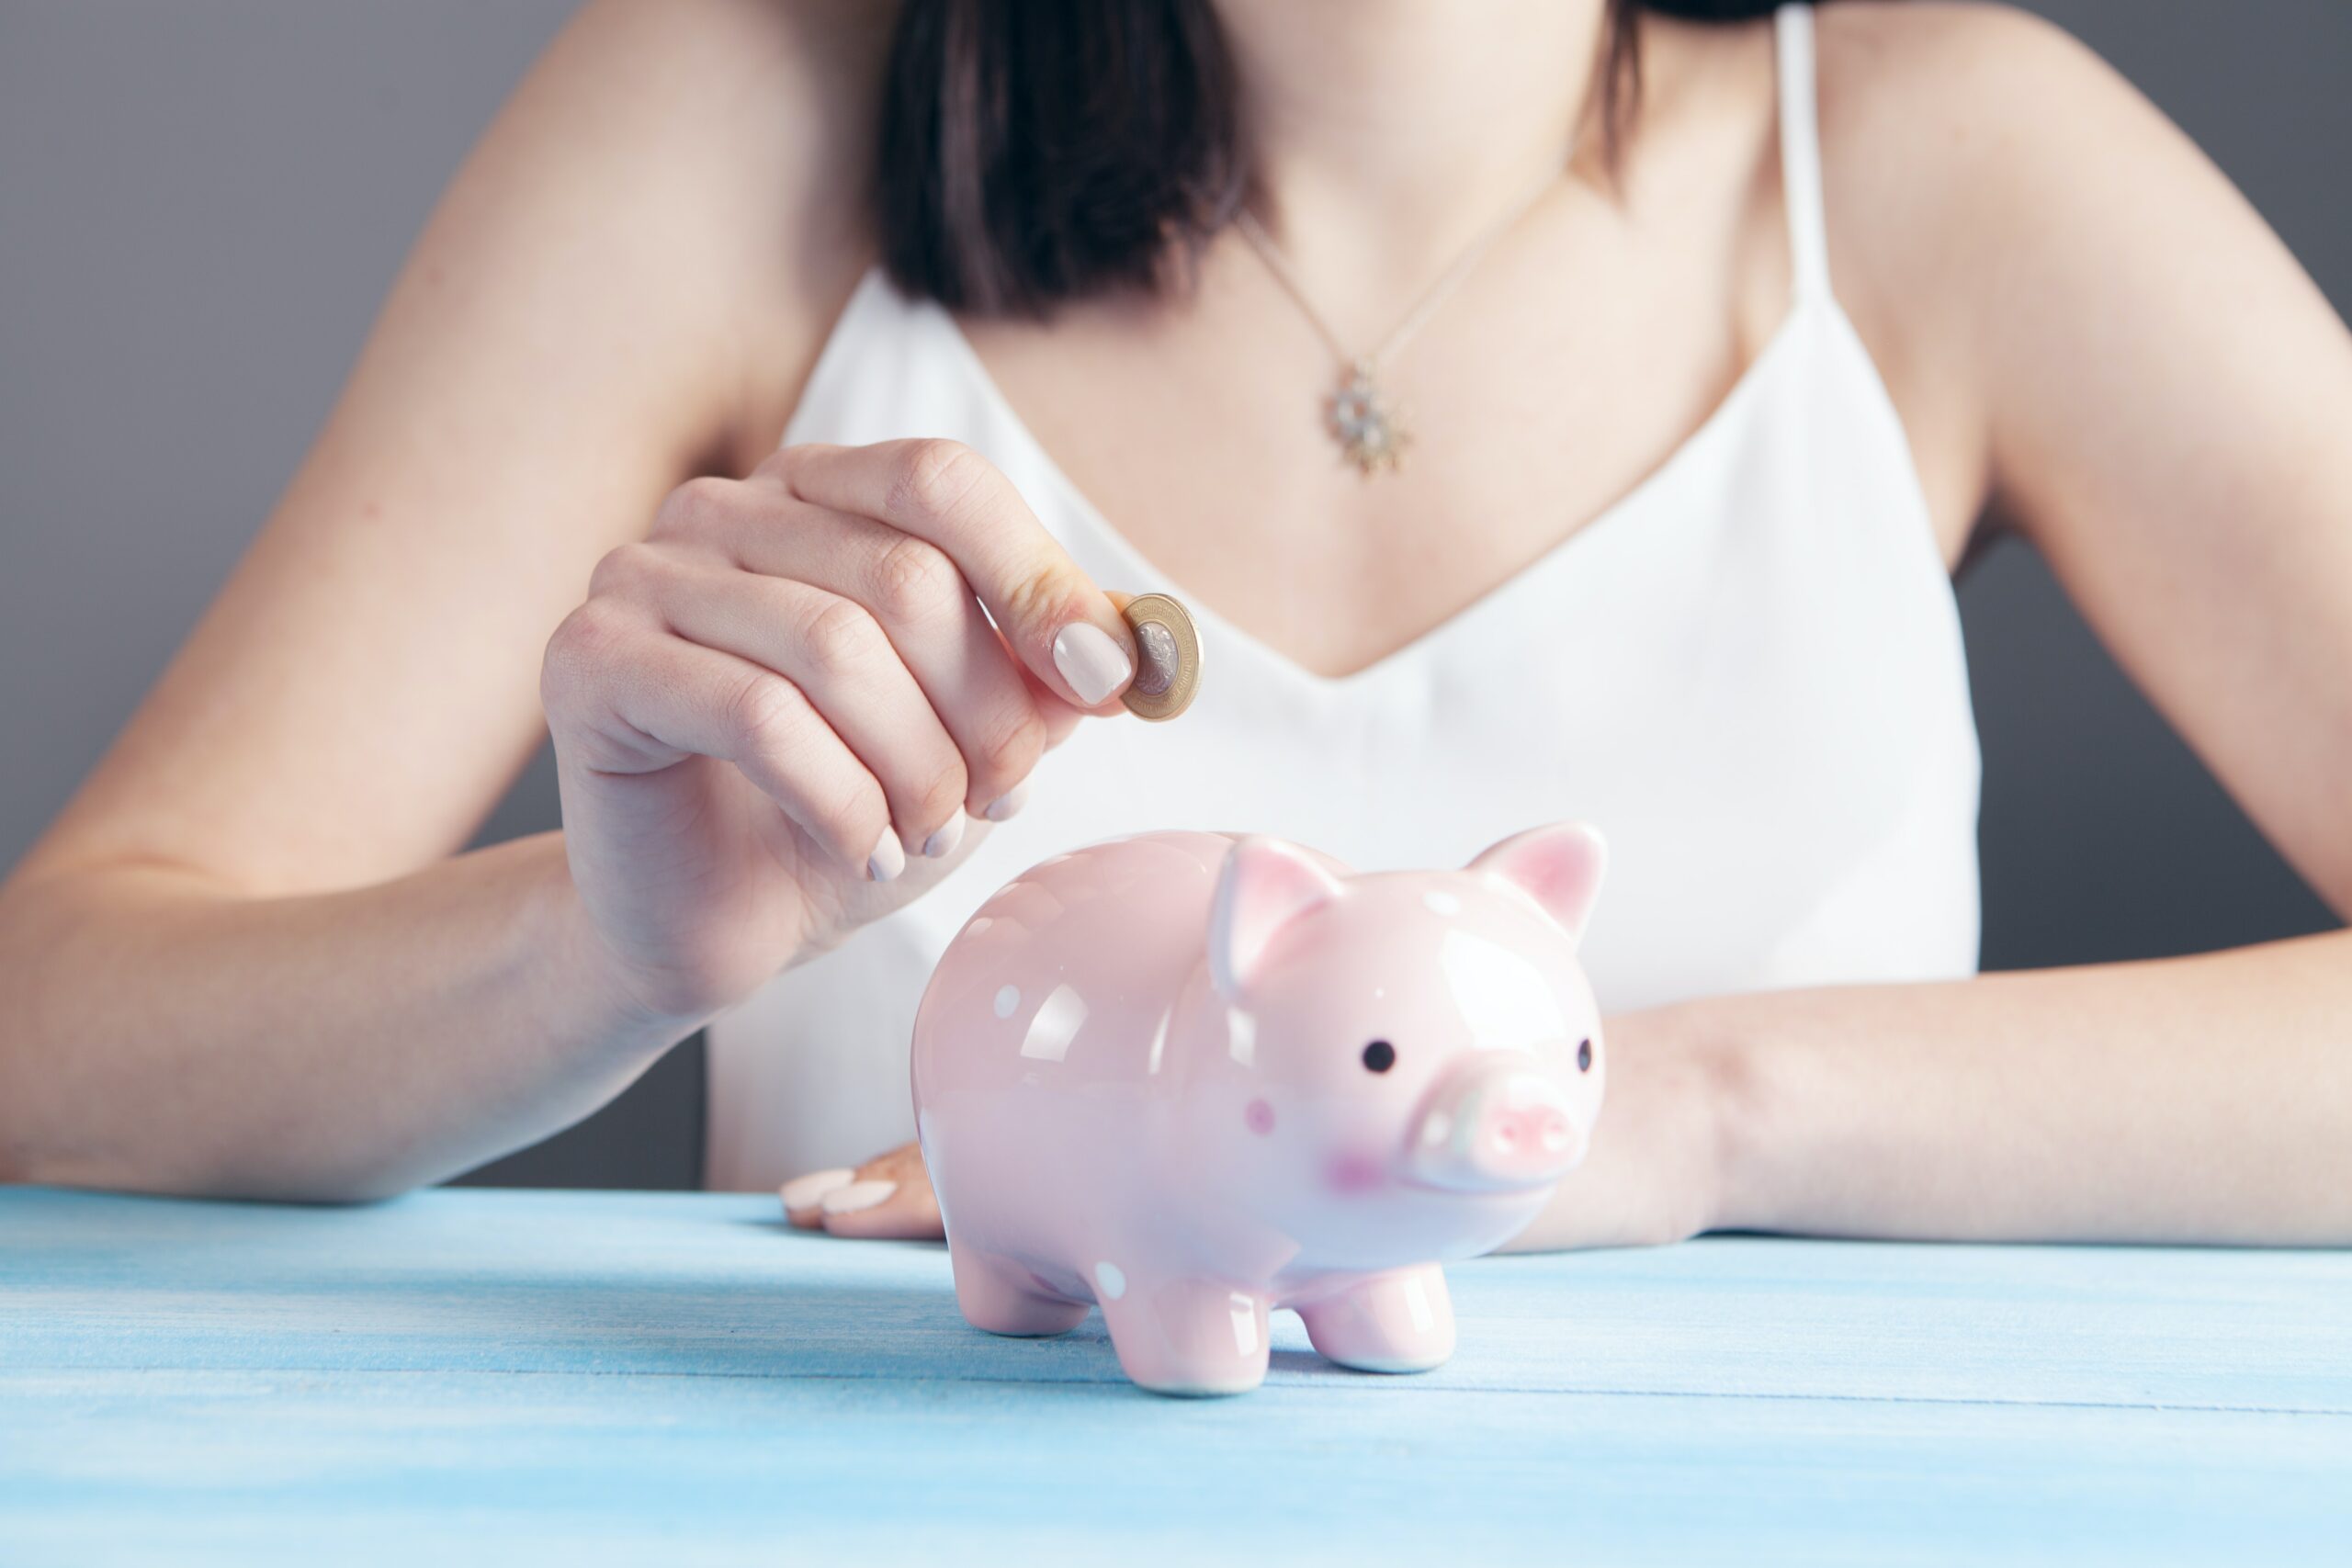 Woman putting gold coin into pink ceramic piggy bank. She is wearing a white camisole top, has dark hair and pink painted nails.